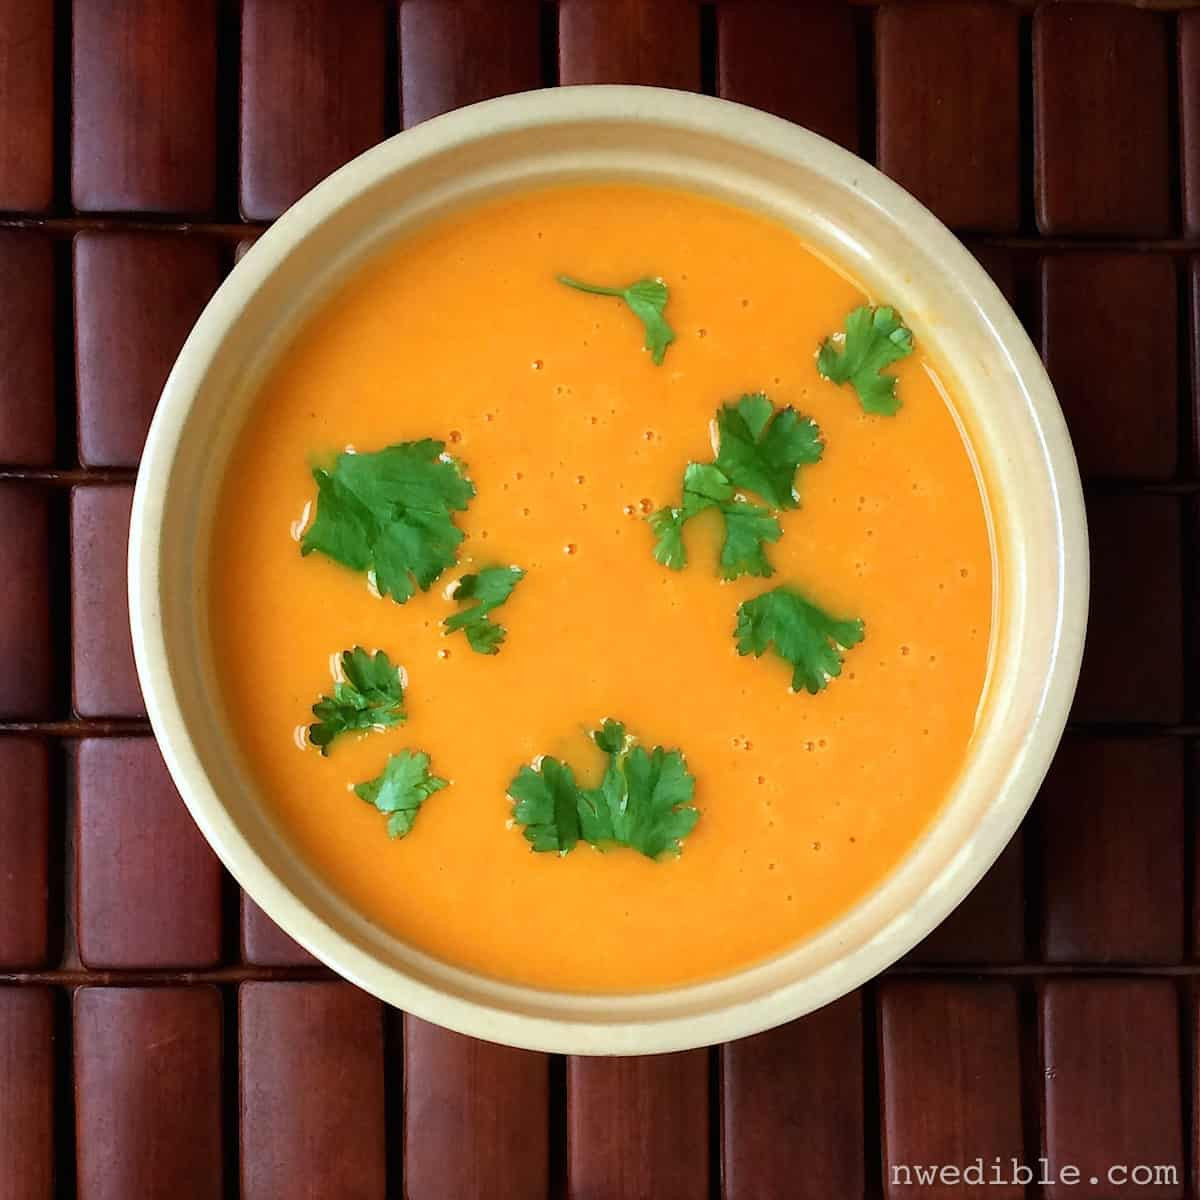 Carrot Soup With Coconut Milk
 Carrot Soup with Green Curry and Coconut Milk